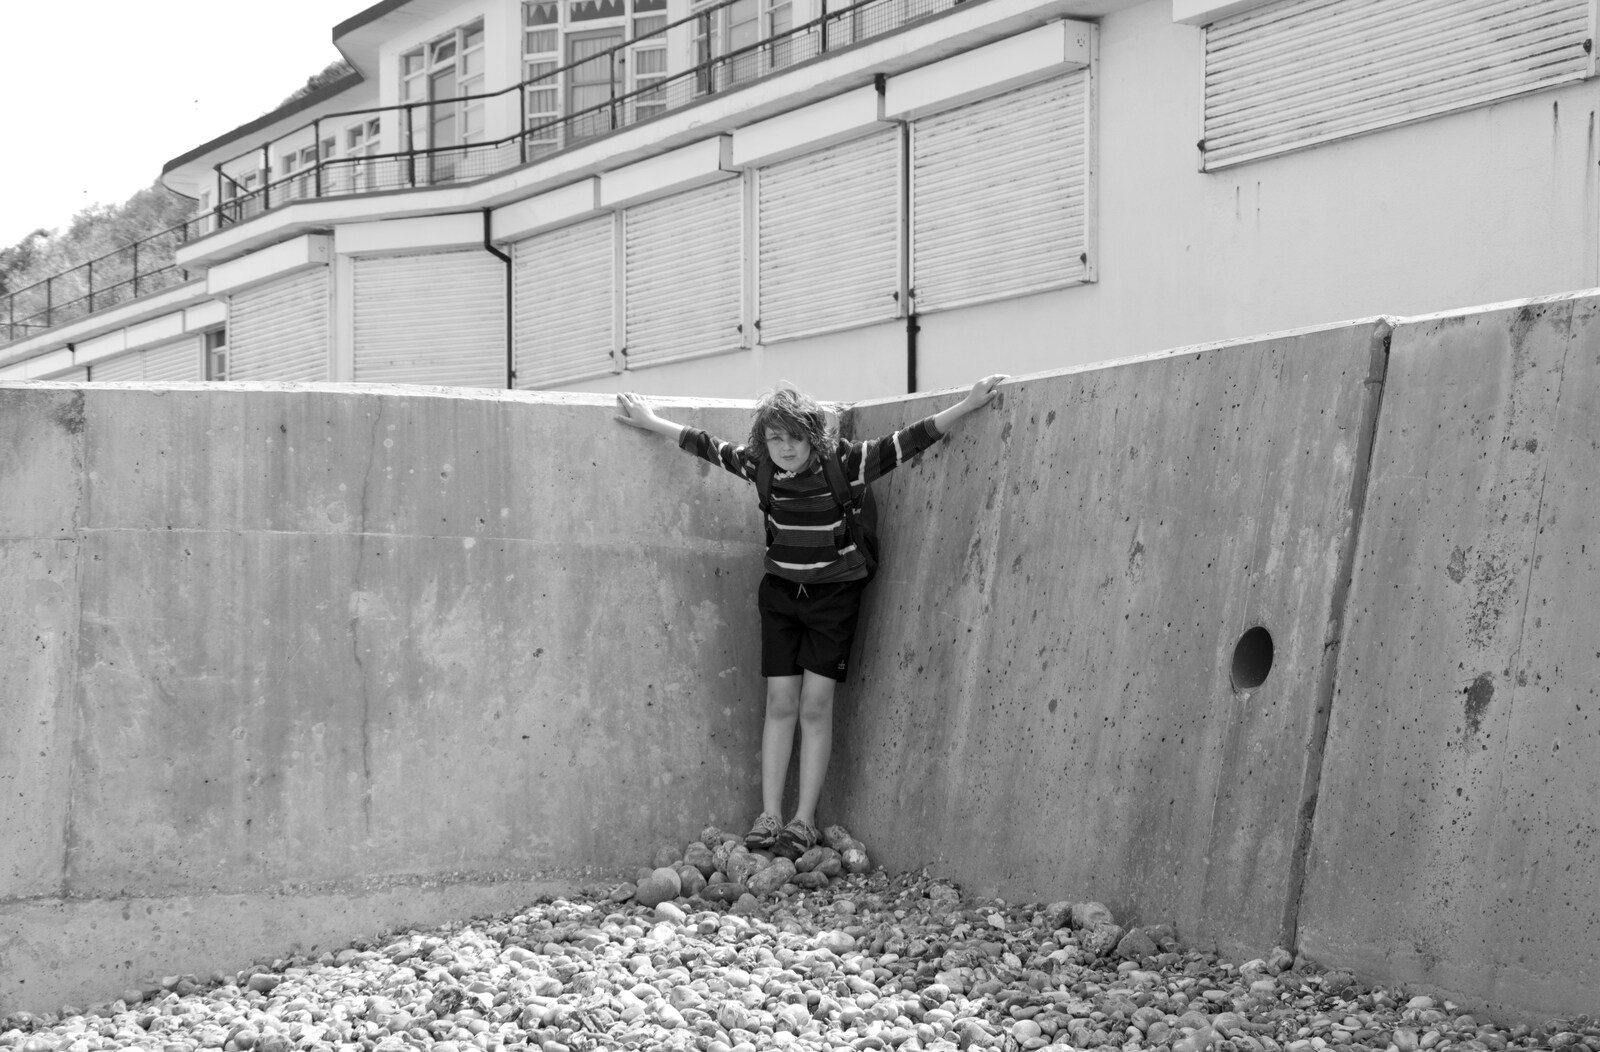 Fred on the concrete wall from Camping on the Coast, East Runton, North Norfolk - 25th July 2020